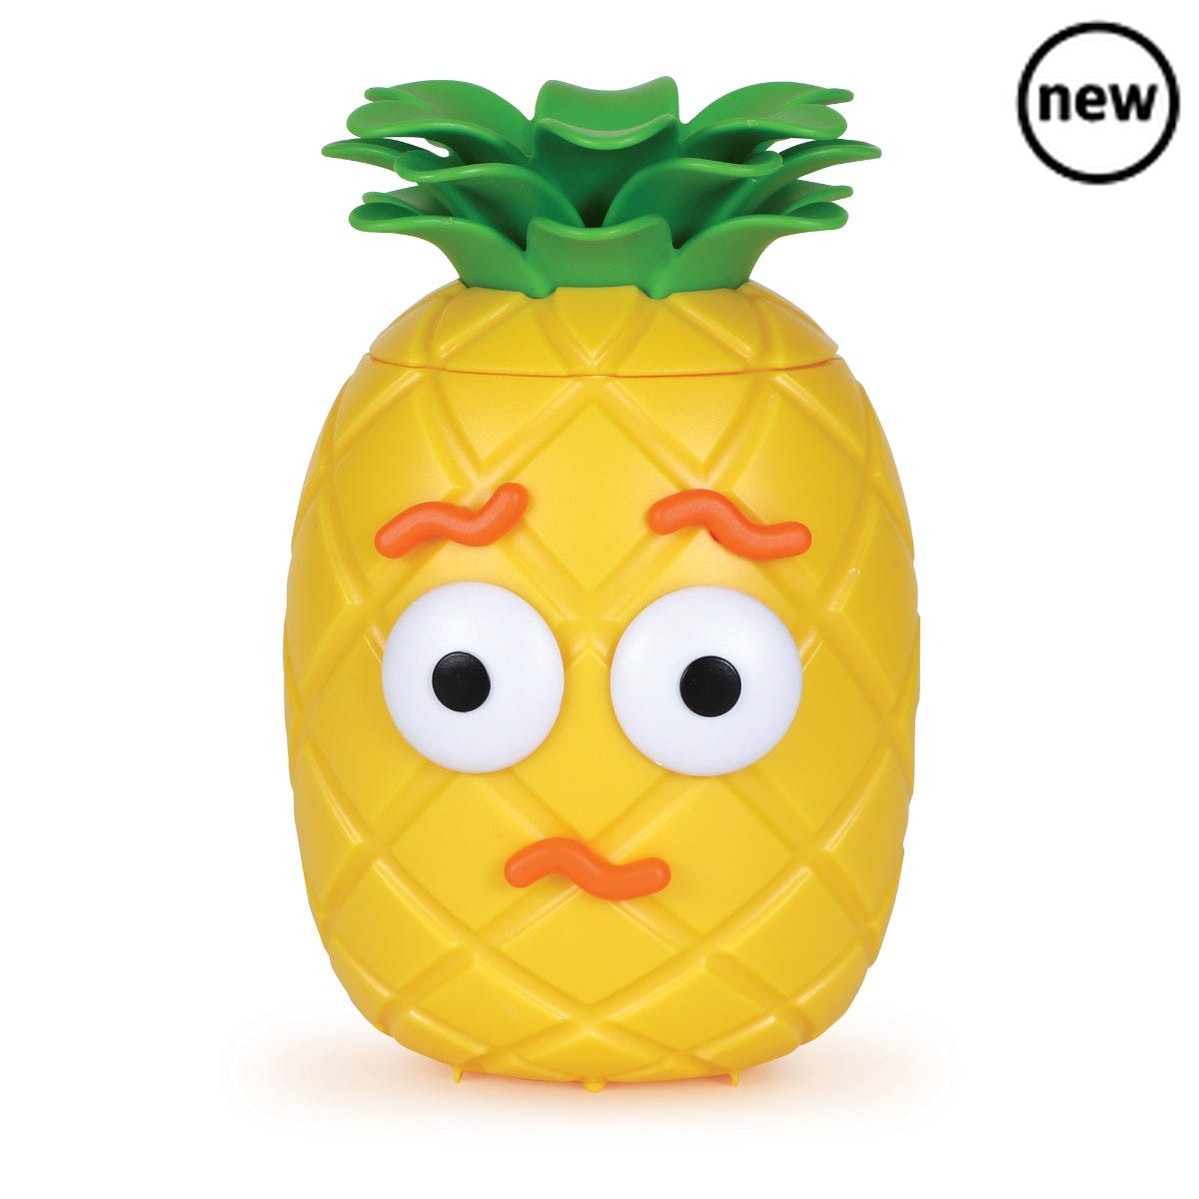 Big Feelings Pineapple Deluxe Set, Introducing the Big Feelings Pineapple Deluxe Set, an expanded version of our multi-award-winning Big Feelings Pineapple™. Dive into a world of emotions and self-discovery with this engaging set that allows children to explore feelings through facial and body expressions.The Big Feelings Pineapple Deluxe Set features 40 larger face pieces and 3 pairs of arms, offering a wide range of emotions to be discovered. Whether it's a happy smile, a worried frown, or a confident sta